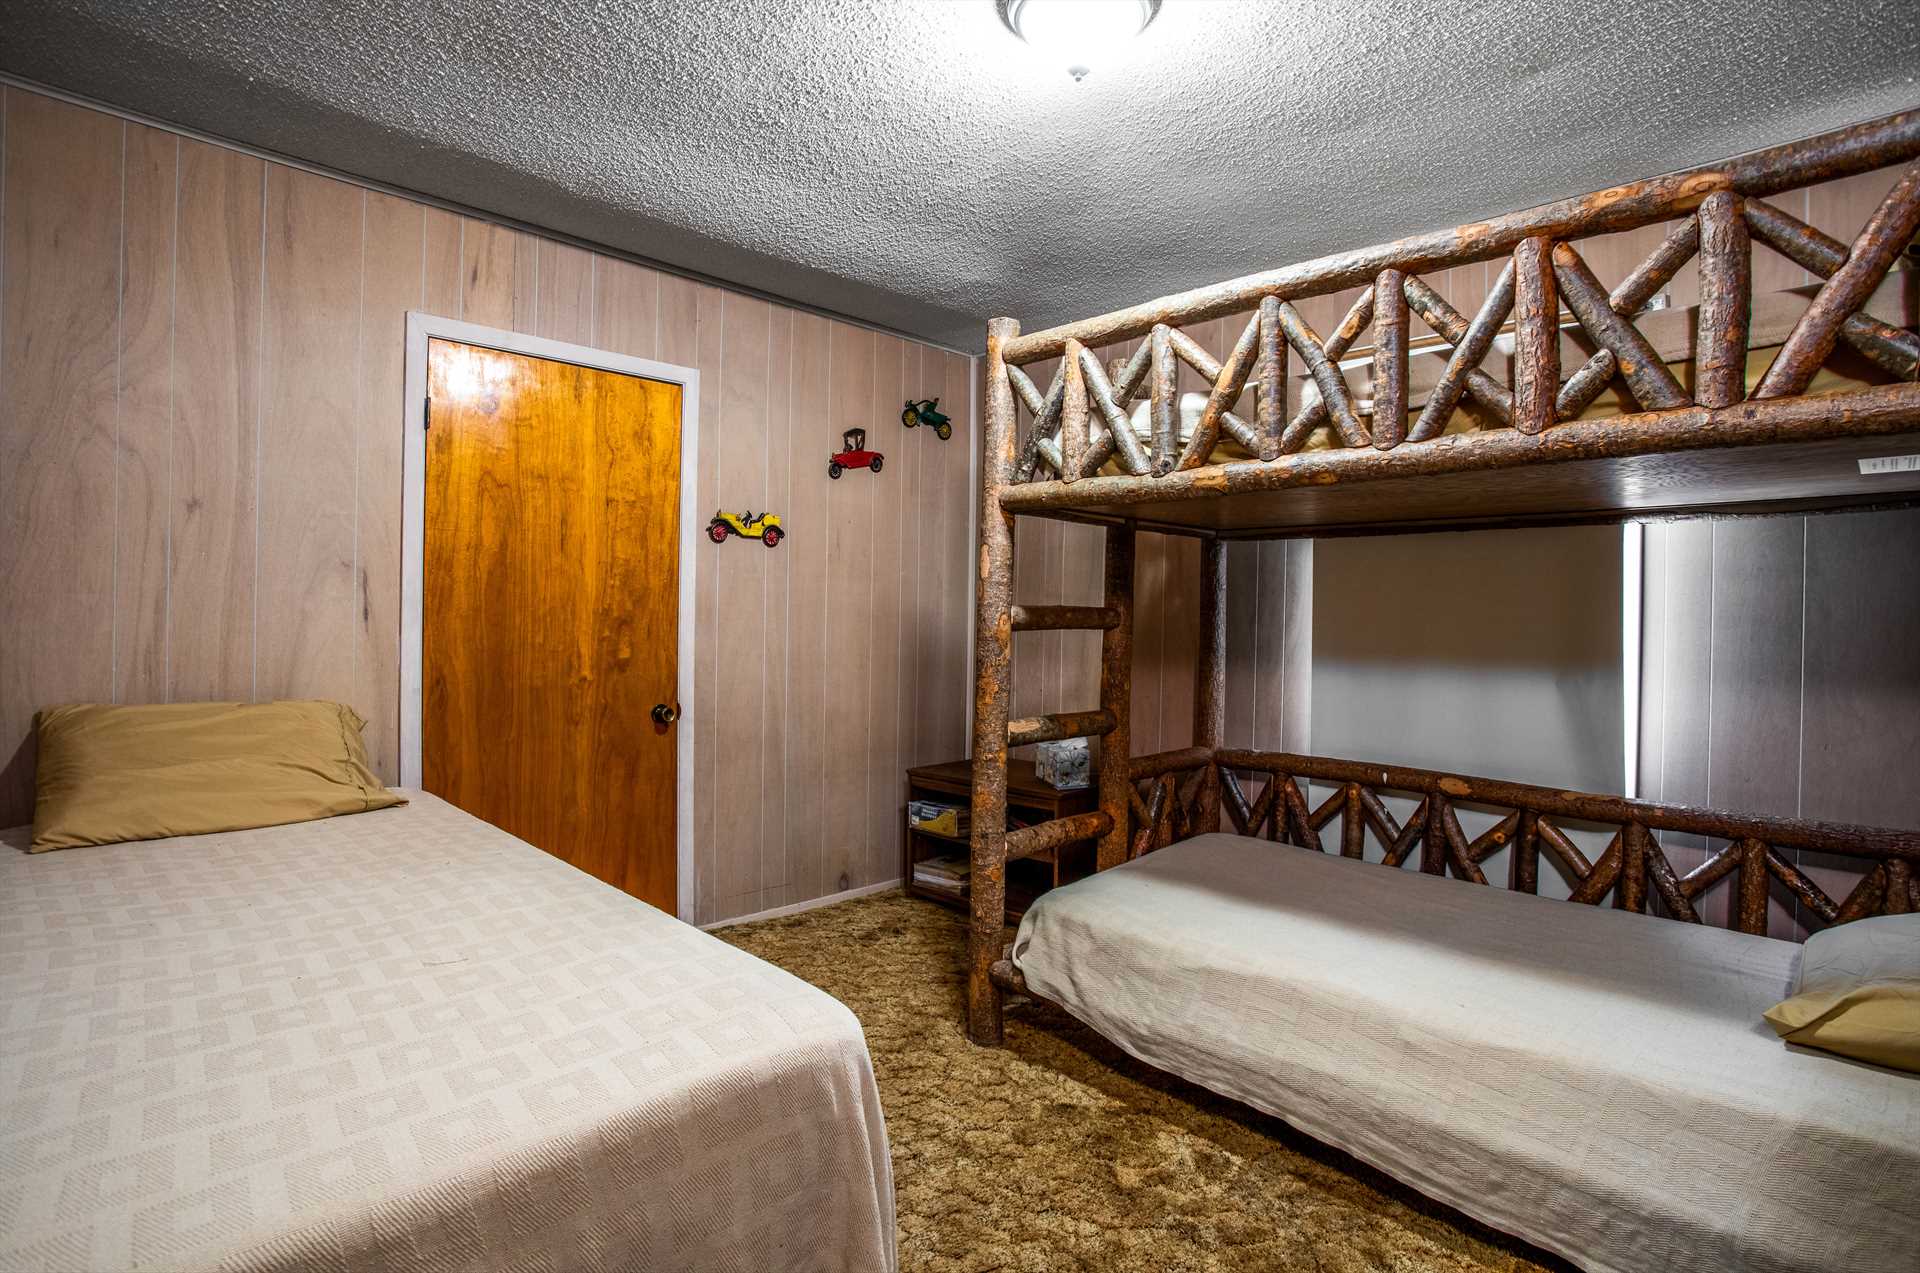                                                 The fifth bedroom features three single beds, two of them stacked in a sturdy and rustic bunk style.